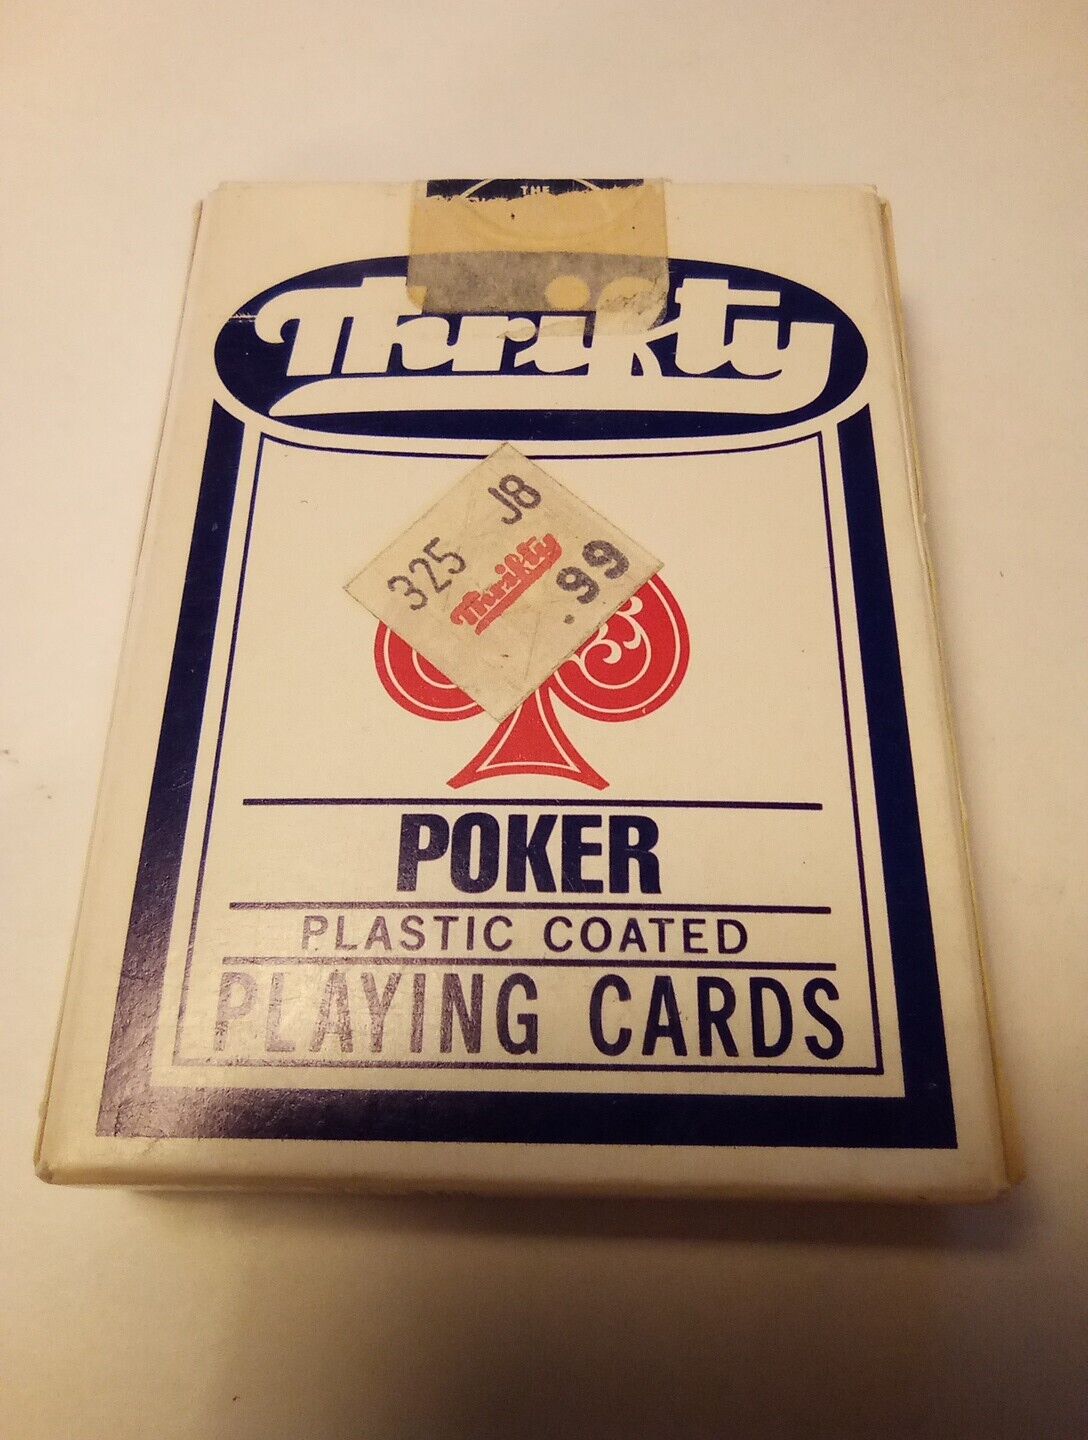 THRIFTY LOGO CARD DECK GREAT FOR ANY VINTAGE COLLECION